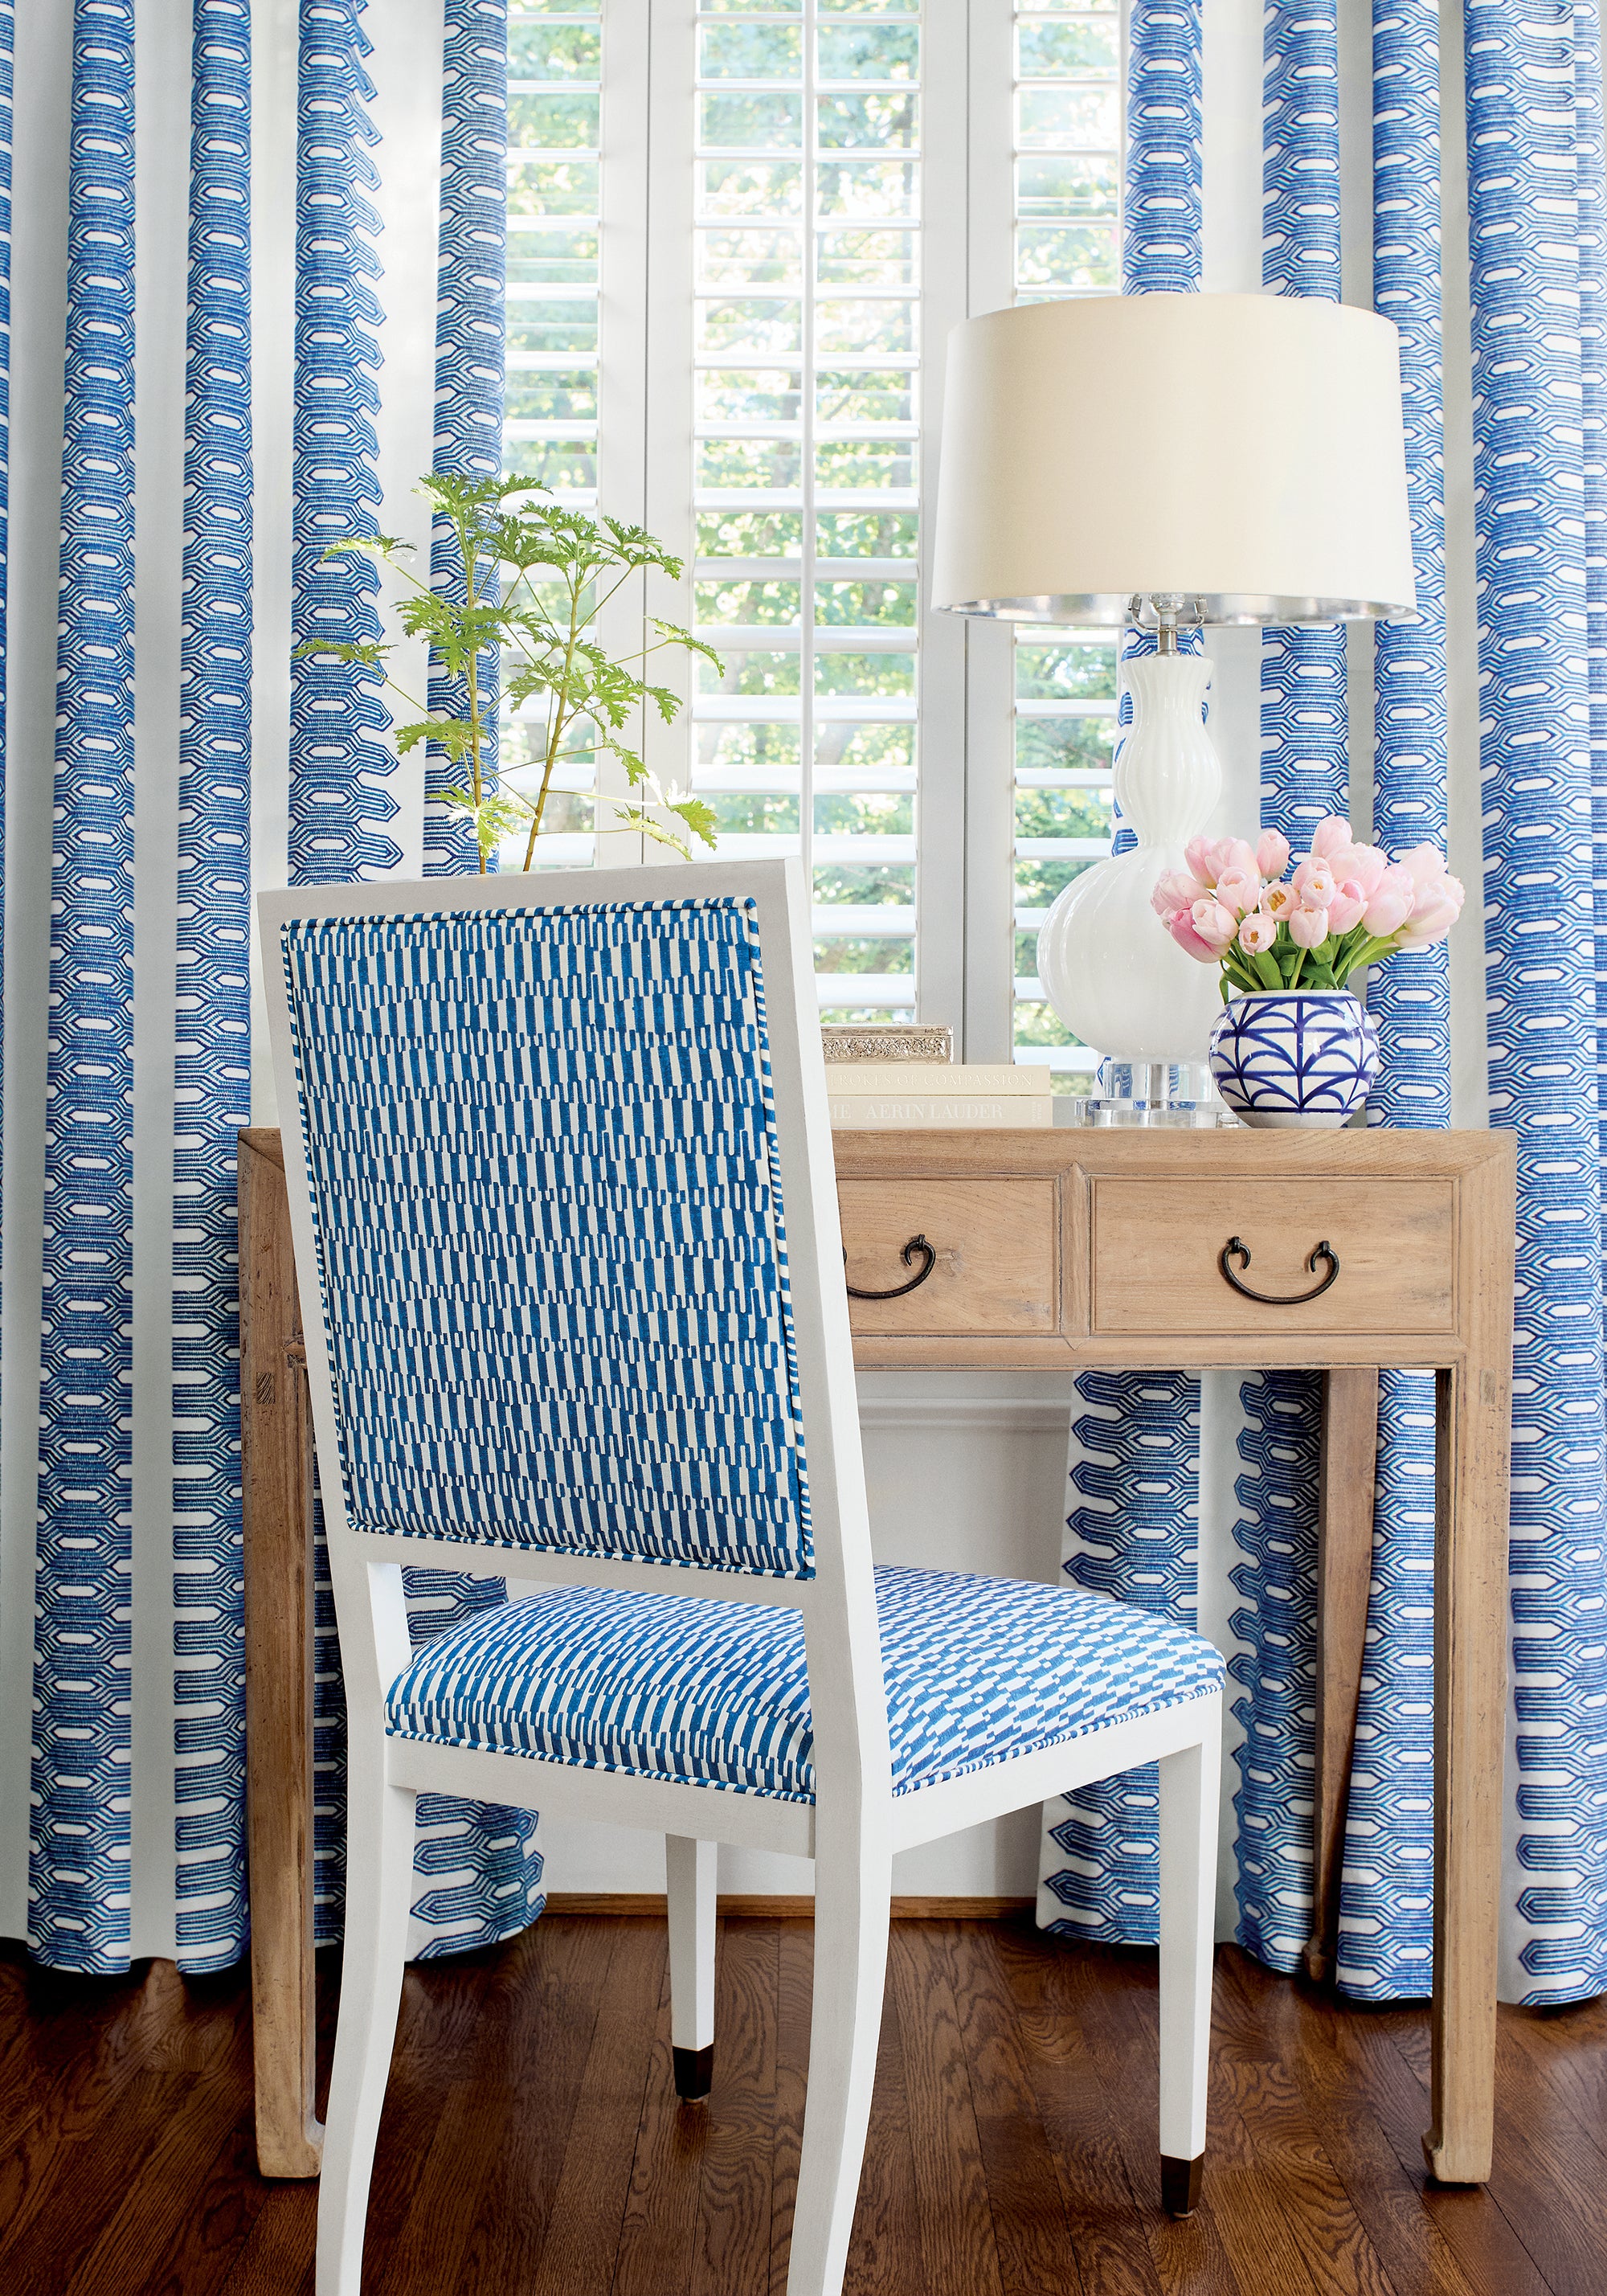 Lauderdale Dining Chair in GoGo printed fabric in navy color - pattern number F920805 by Thibaut in the Eden collection